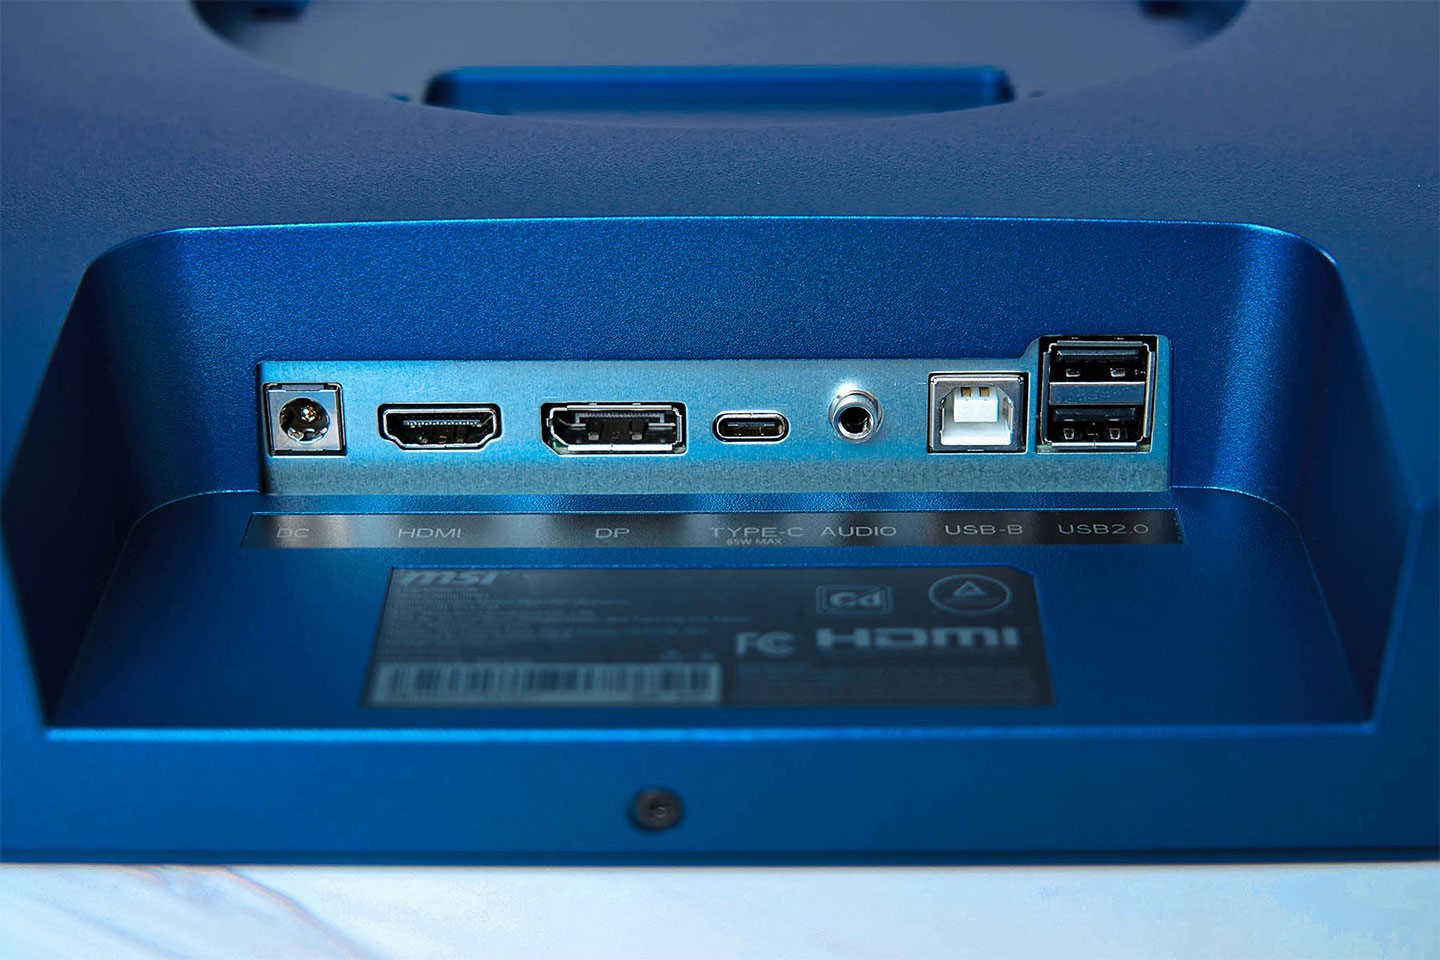 Various connection ports are planned at the bottom of the monitor, including power interface, HDMI port, DisplayPort, USB Type-C, 3.5 mm audio output, USB Type-B and two sets of USB 2.0 (Type-A) ports.